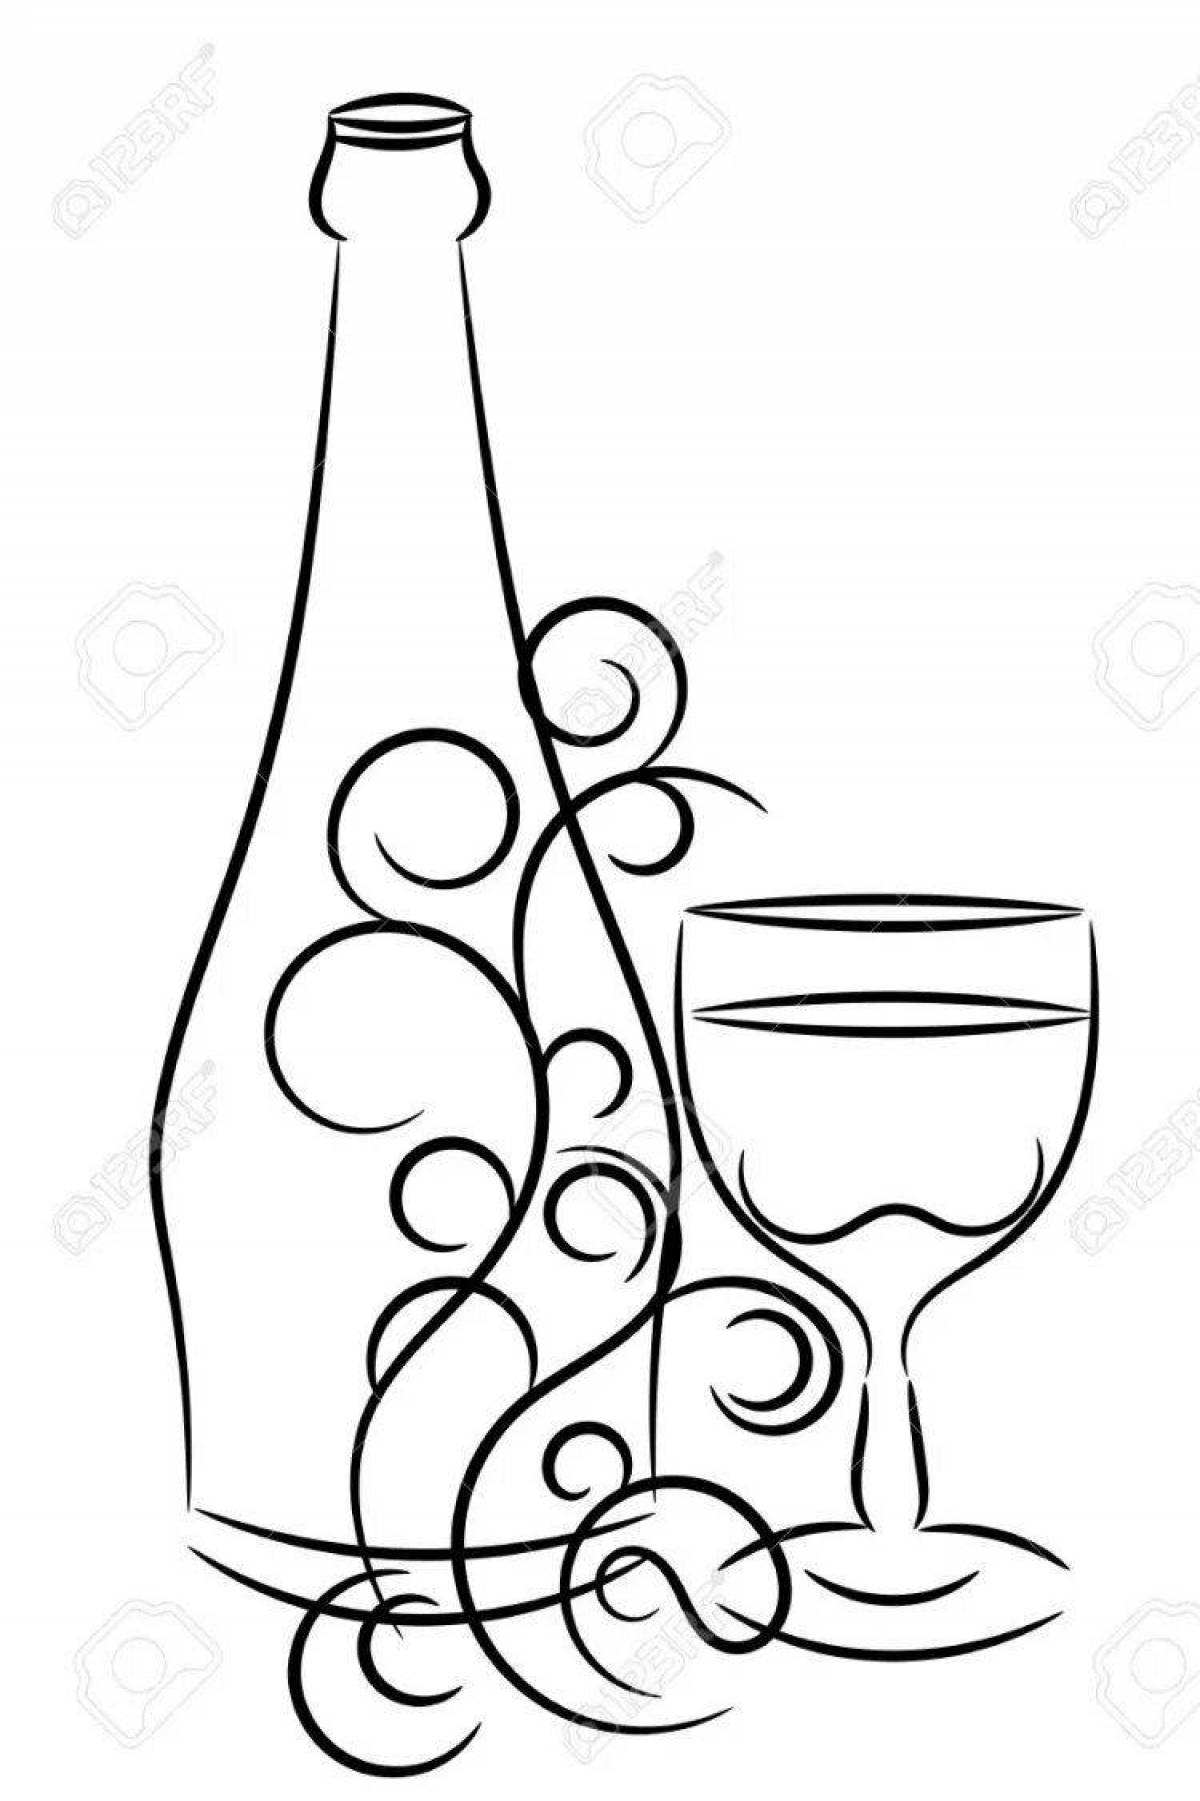 Charming wine coloring page